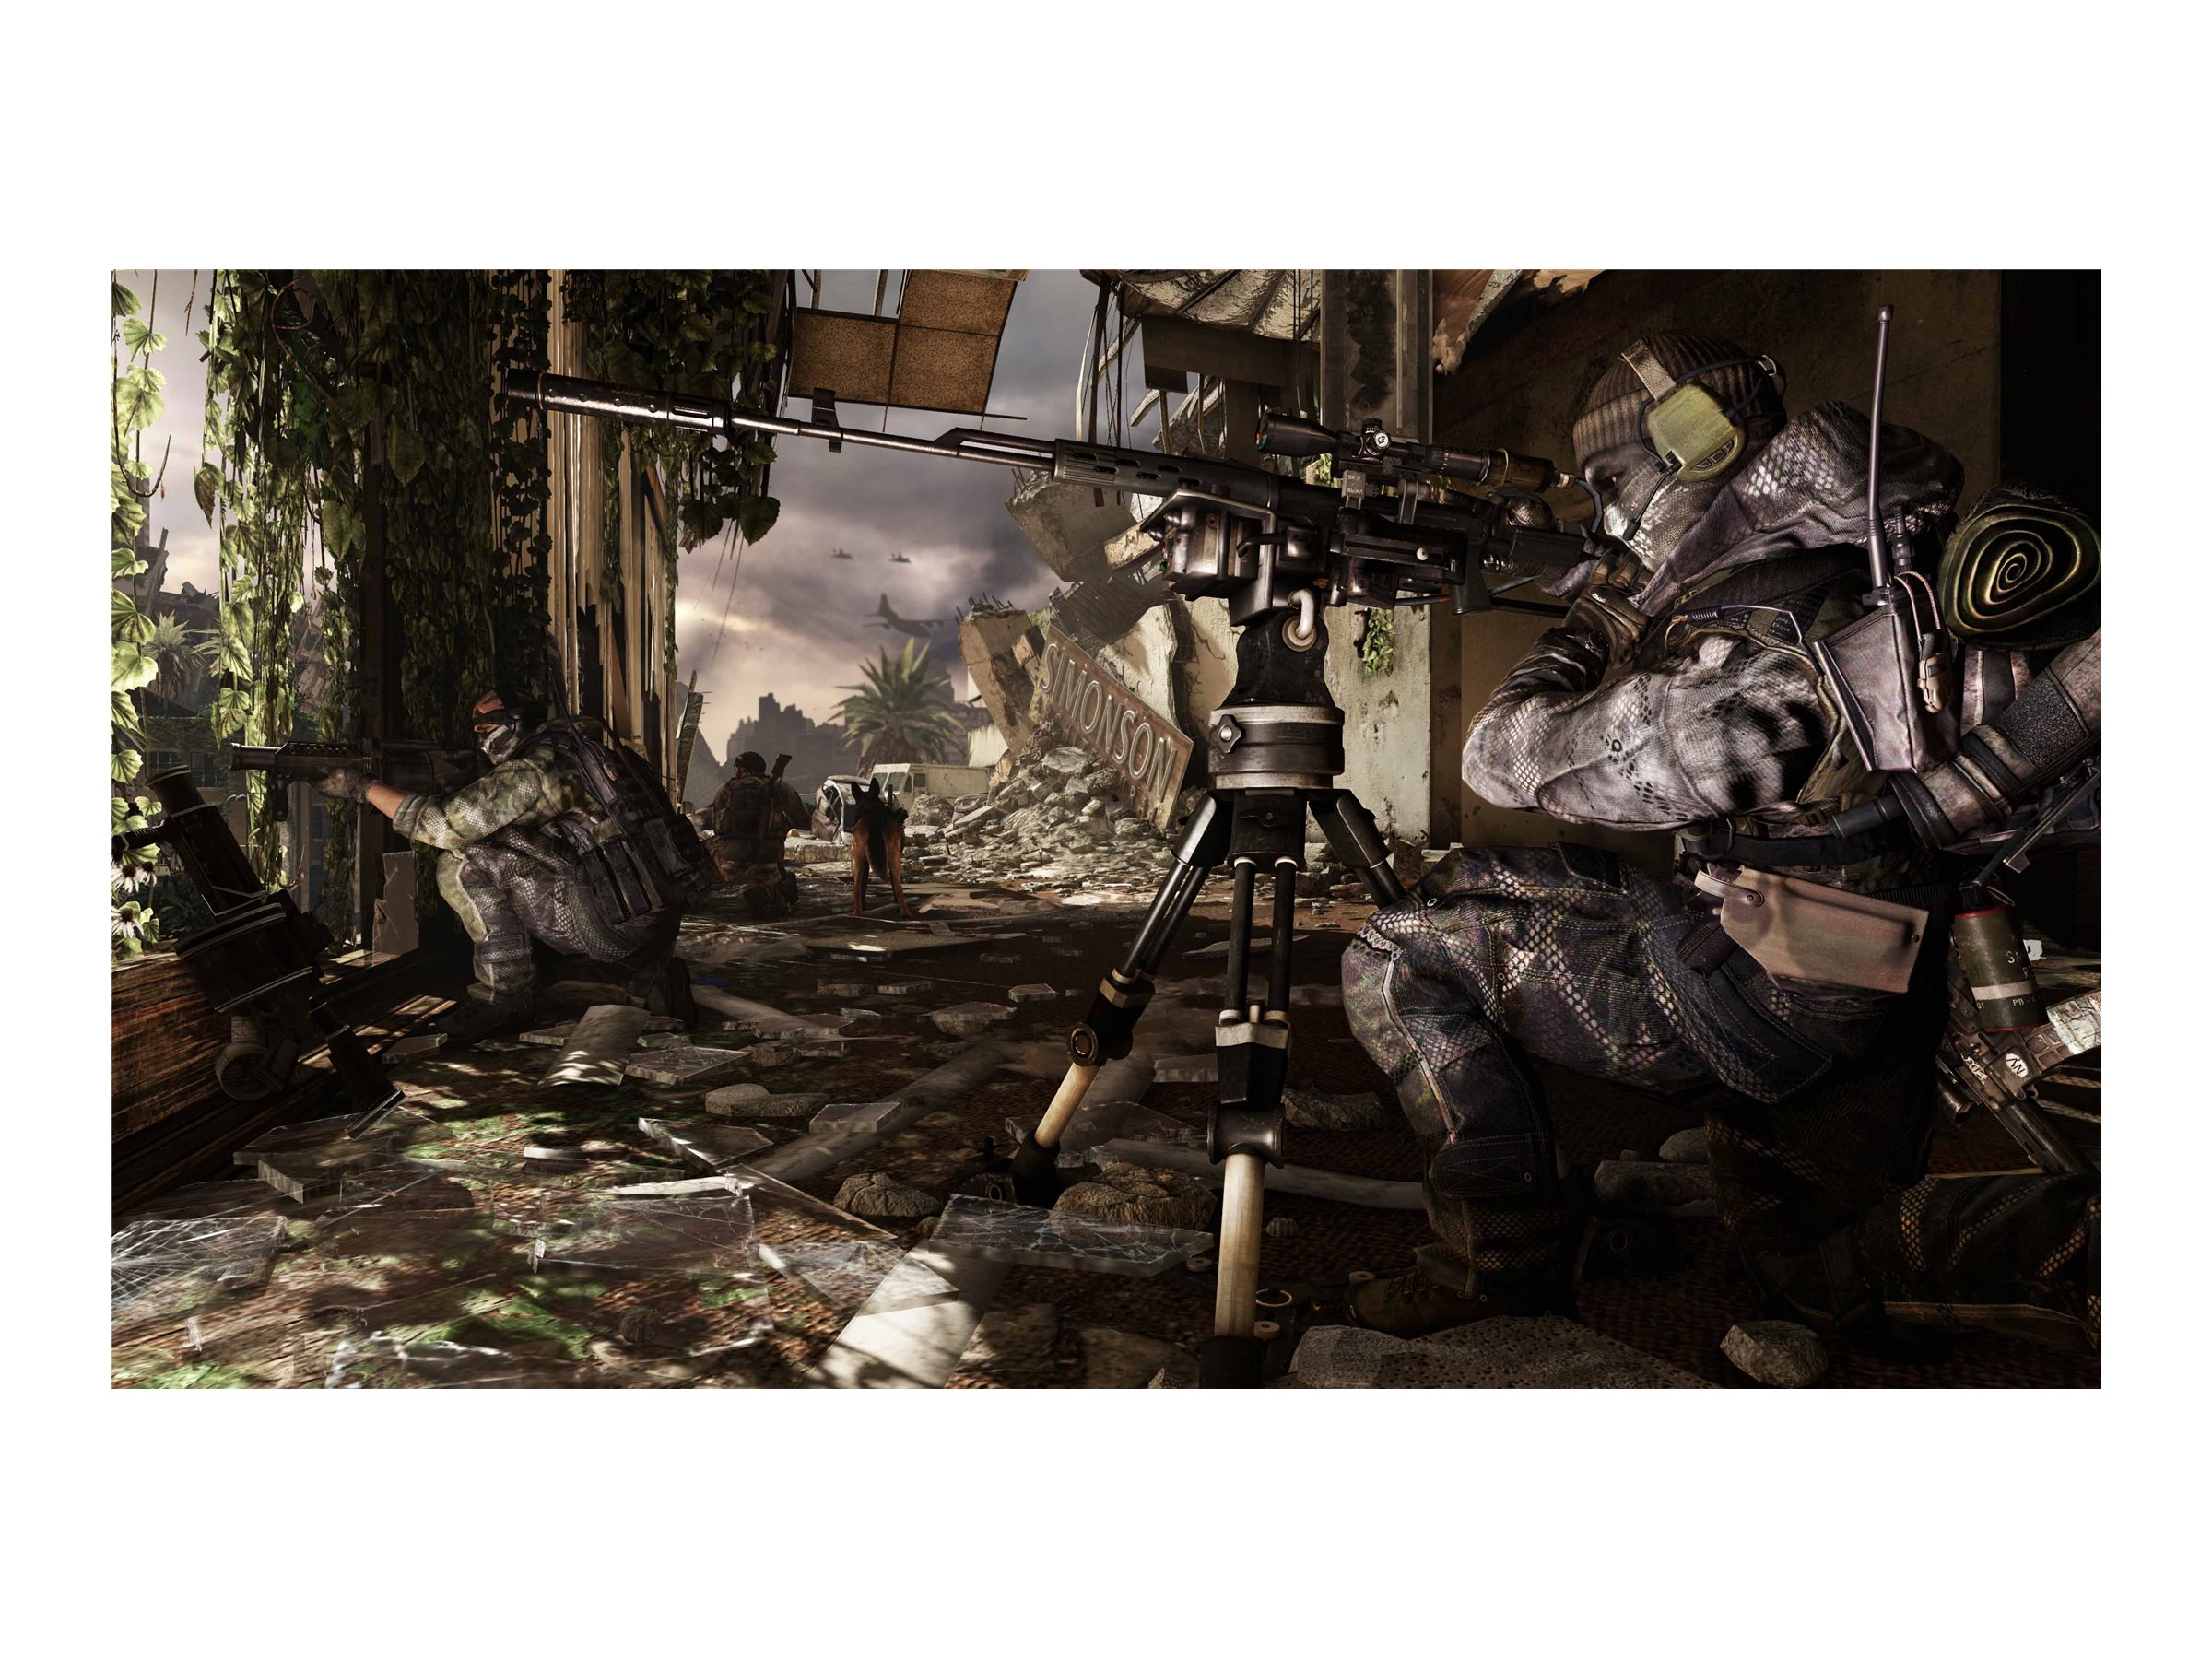 Call of Duty: Ghosts, Activision, PlayStation 3, 047875846777 - image 4 of 14